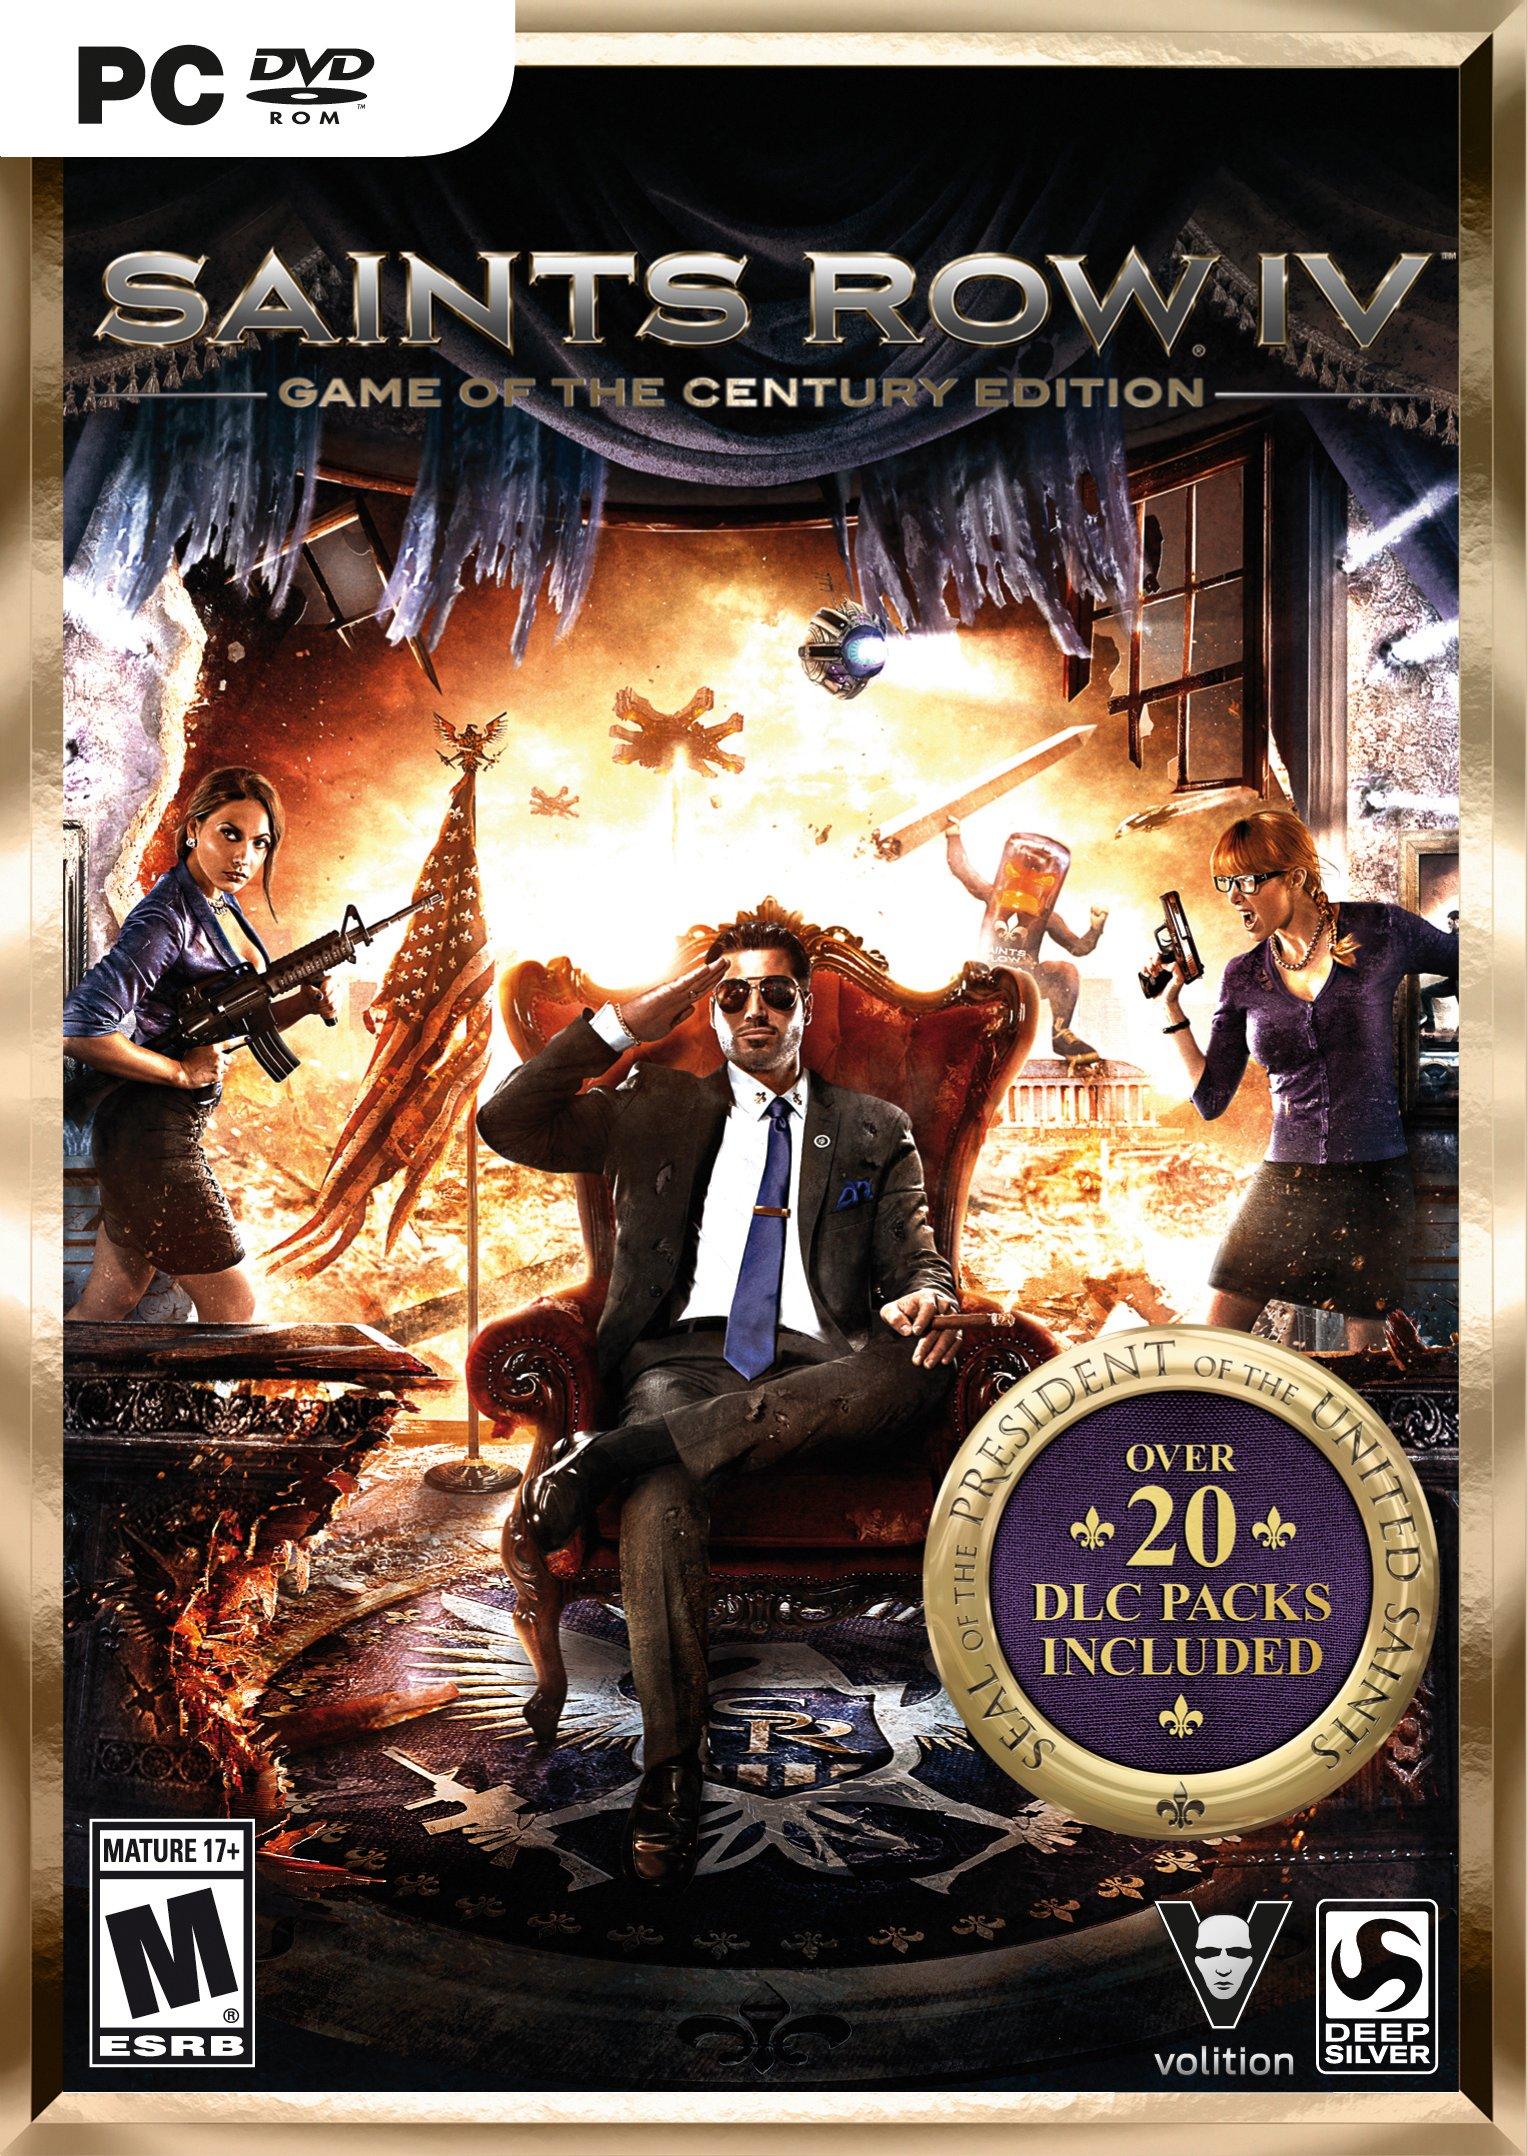 Saints Row IV Game of the Century Edition - PC